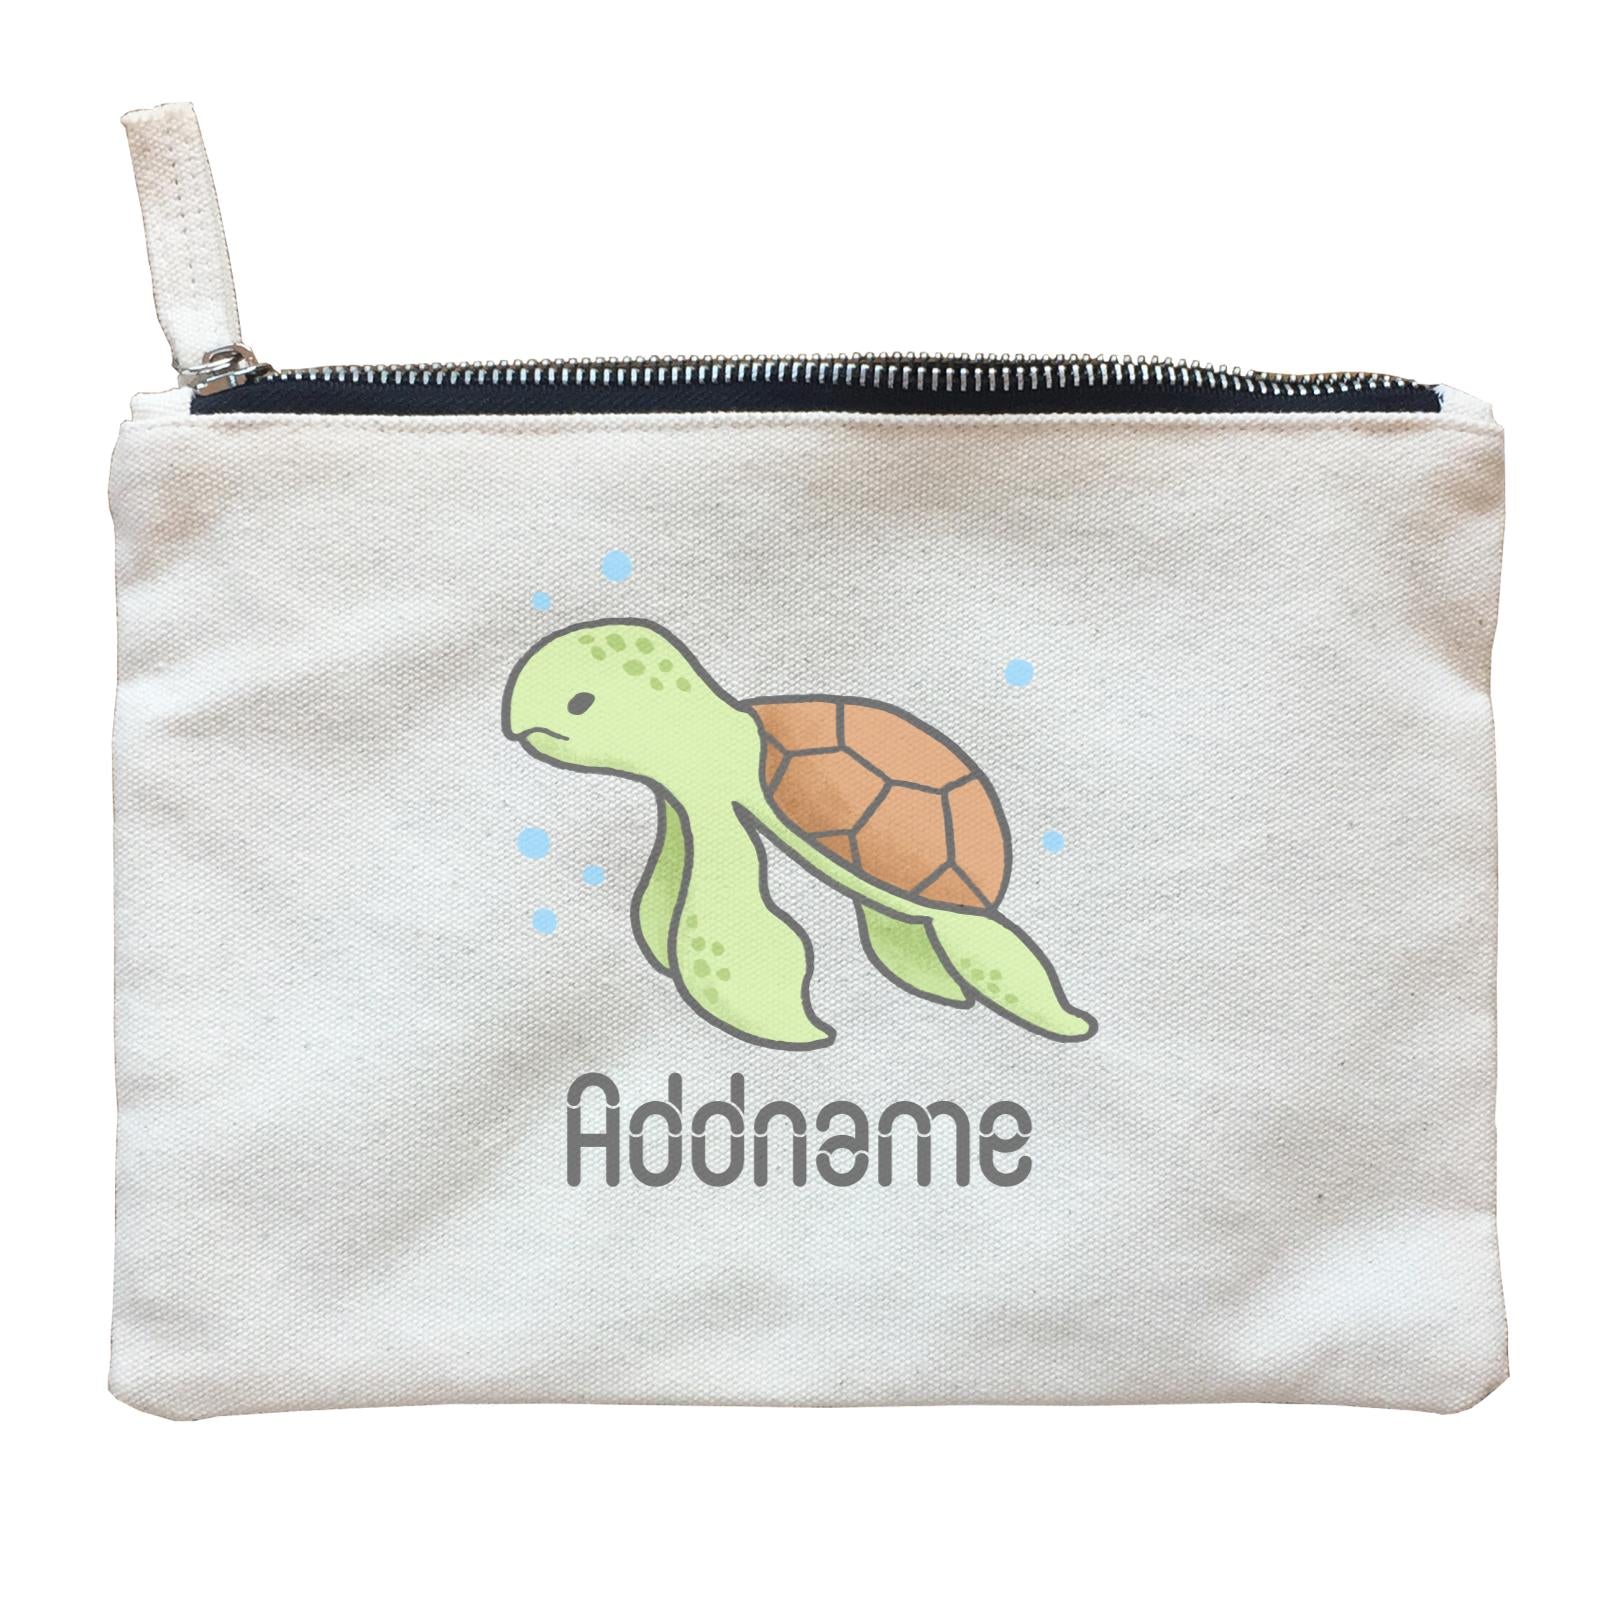 Cute Hand Drawn Style Turtle Addname Zipper Pouch